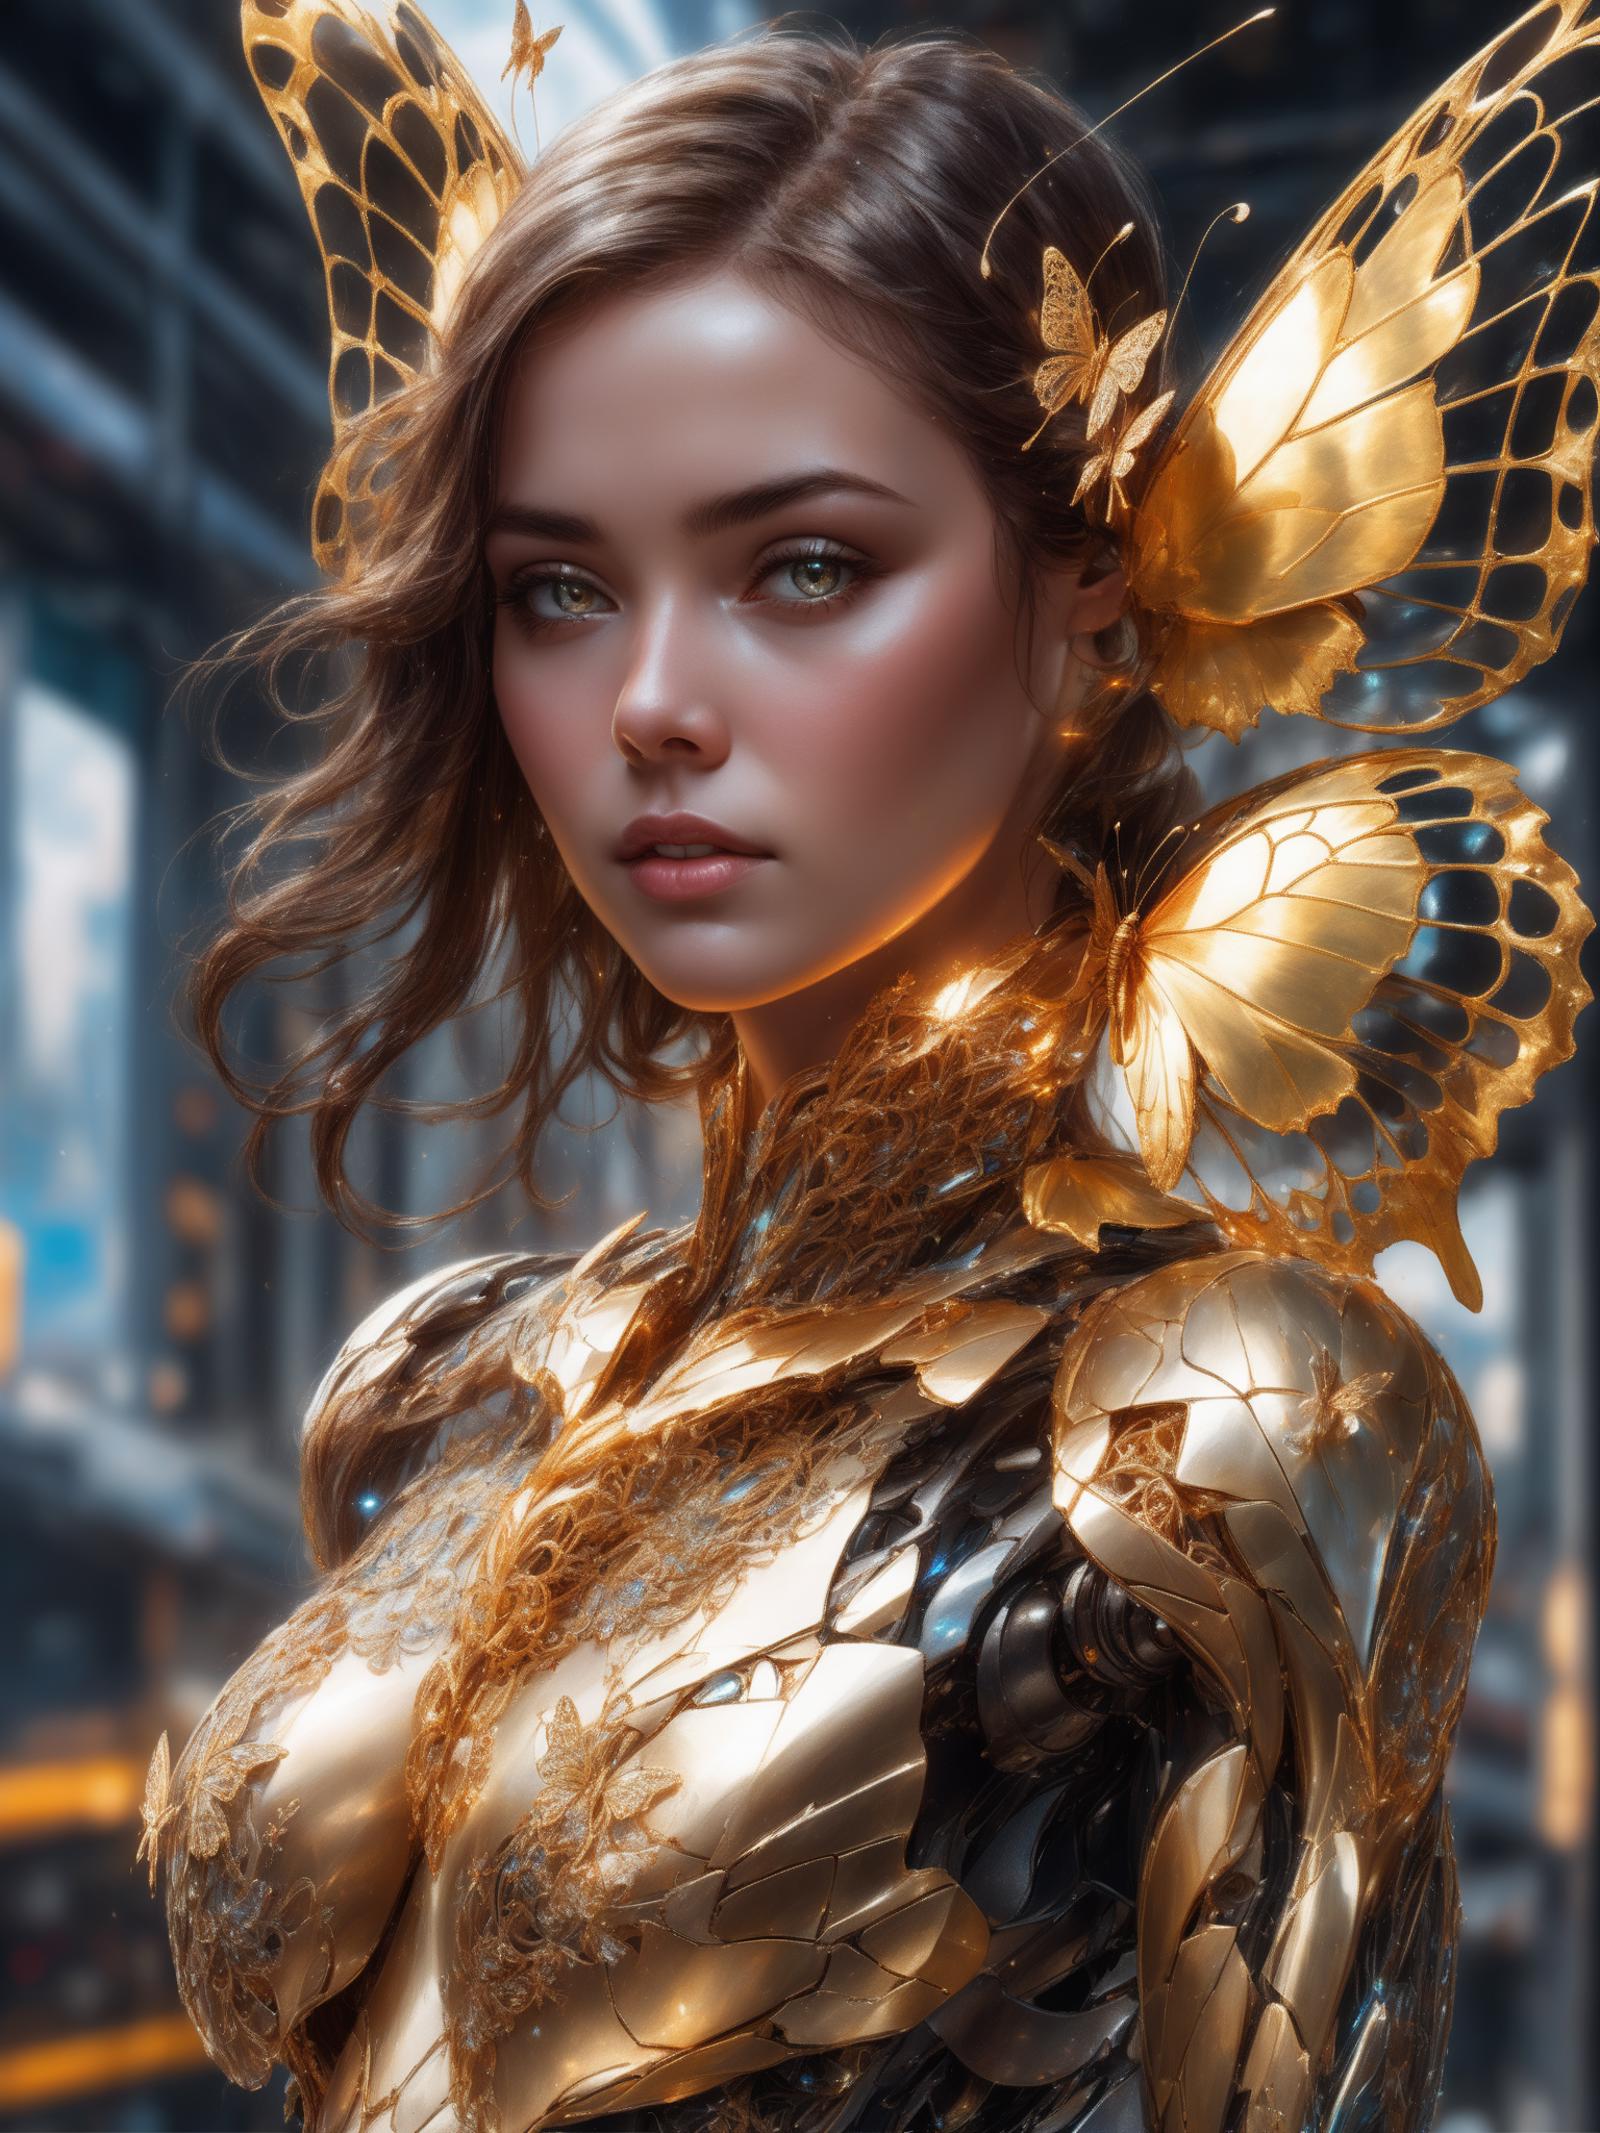 A woman wearing gold and black, with green eyes, poses in a futuristic setting.